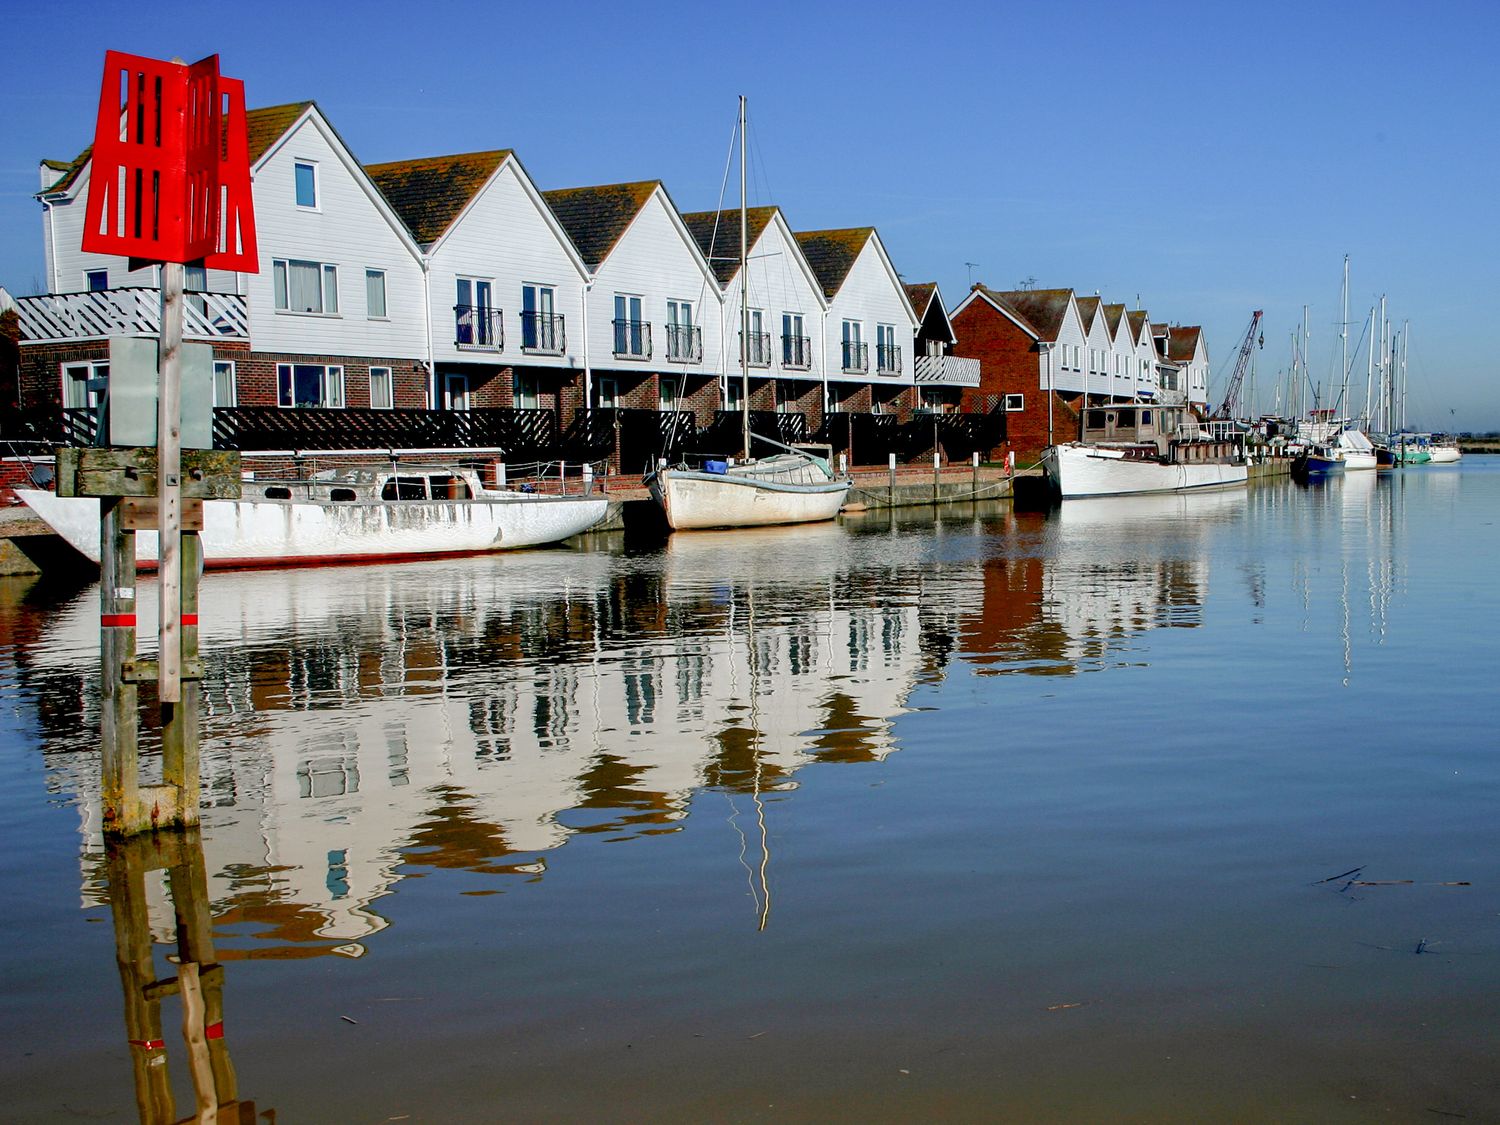 17 The Boathouse, East Sussex